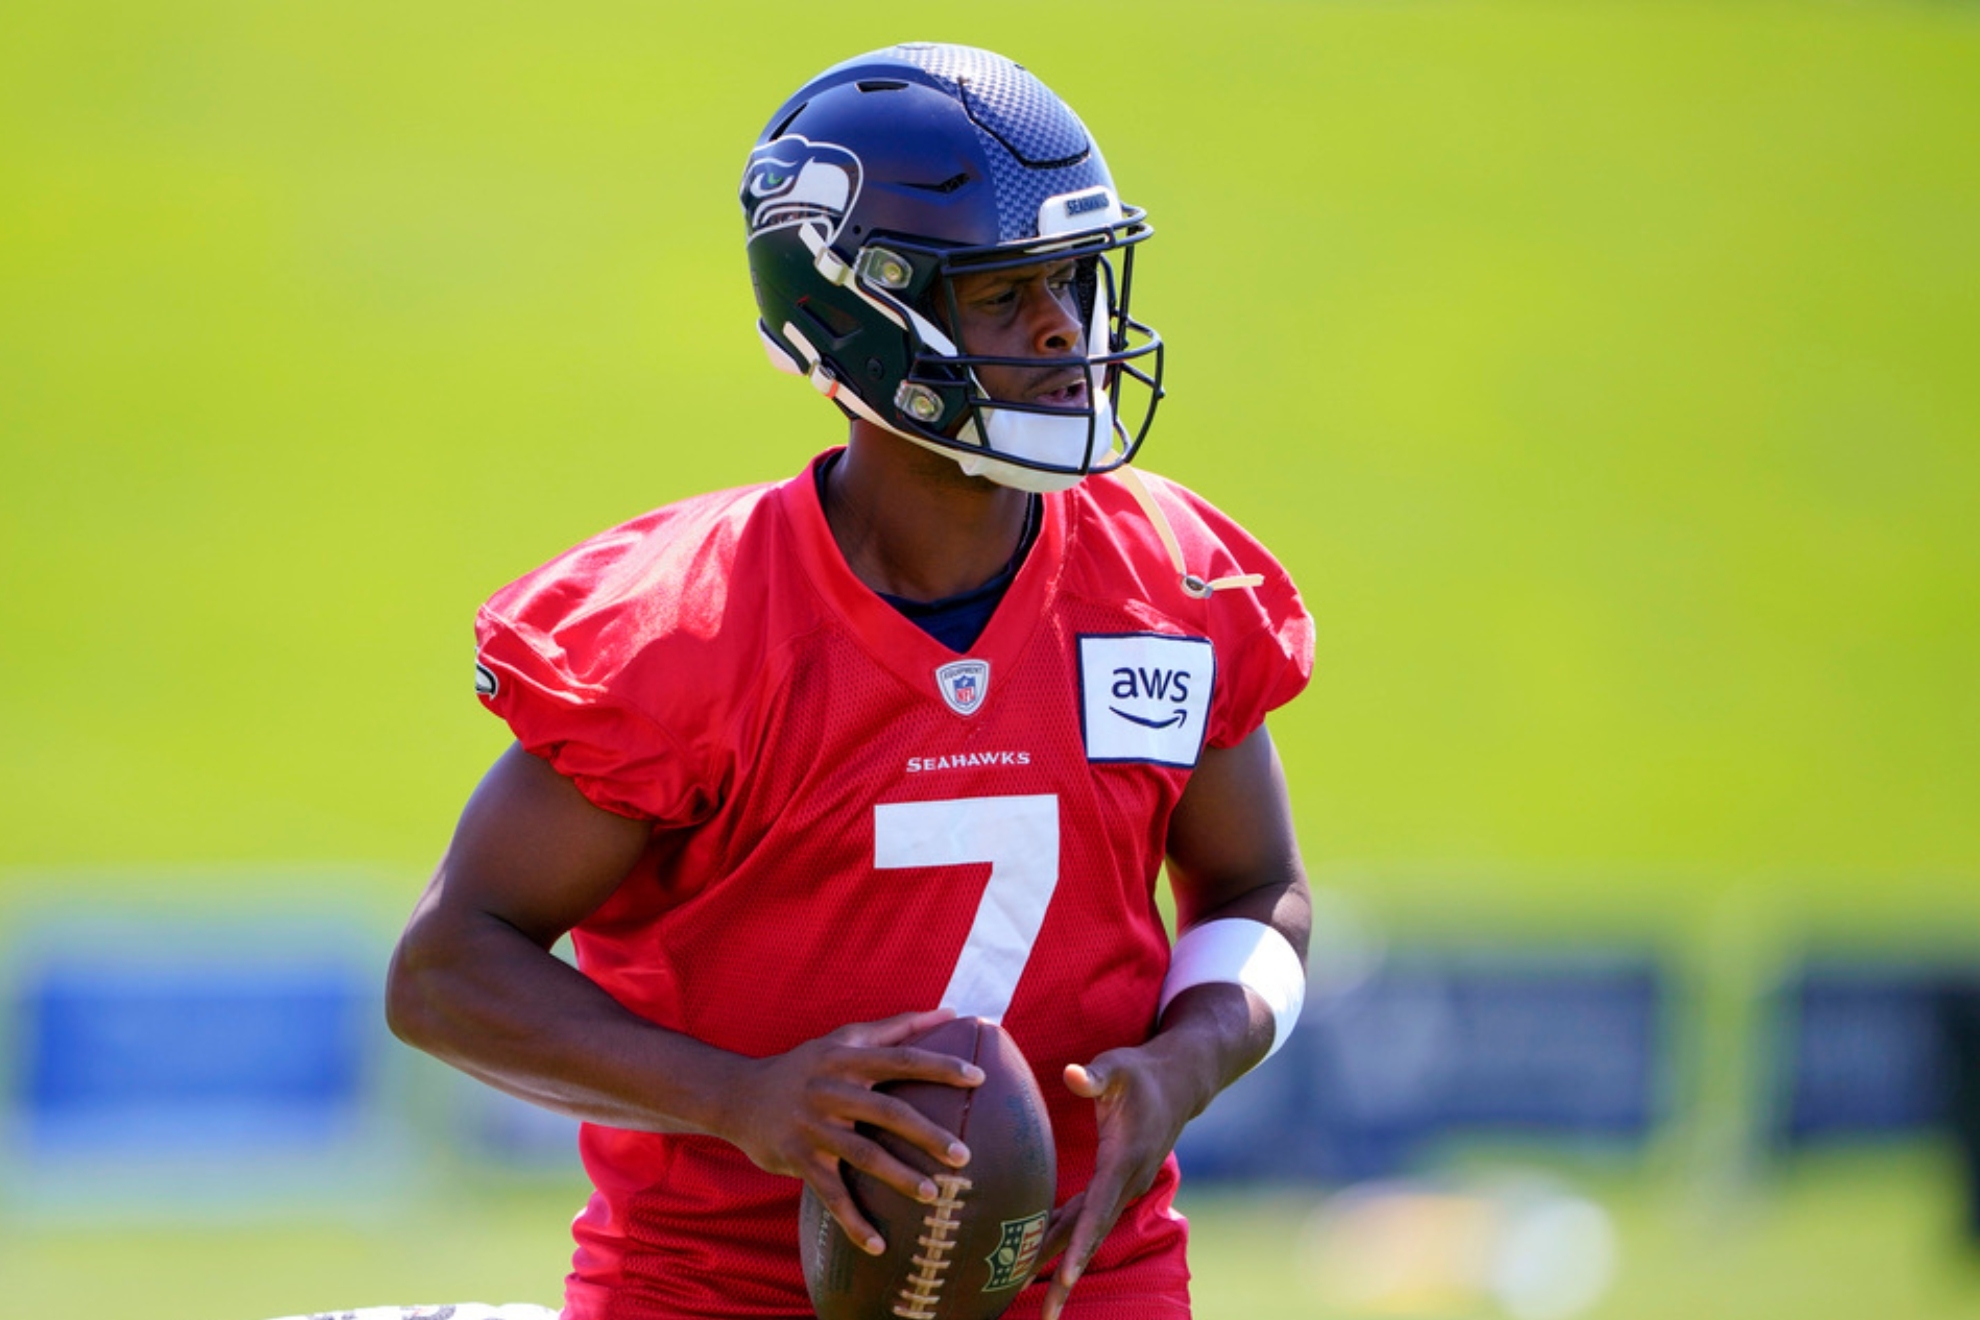 Geno Smith will look to build upon his first season as a starter in Seattle